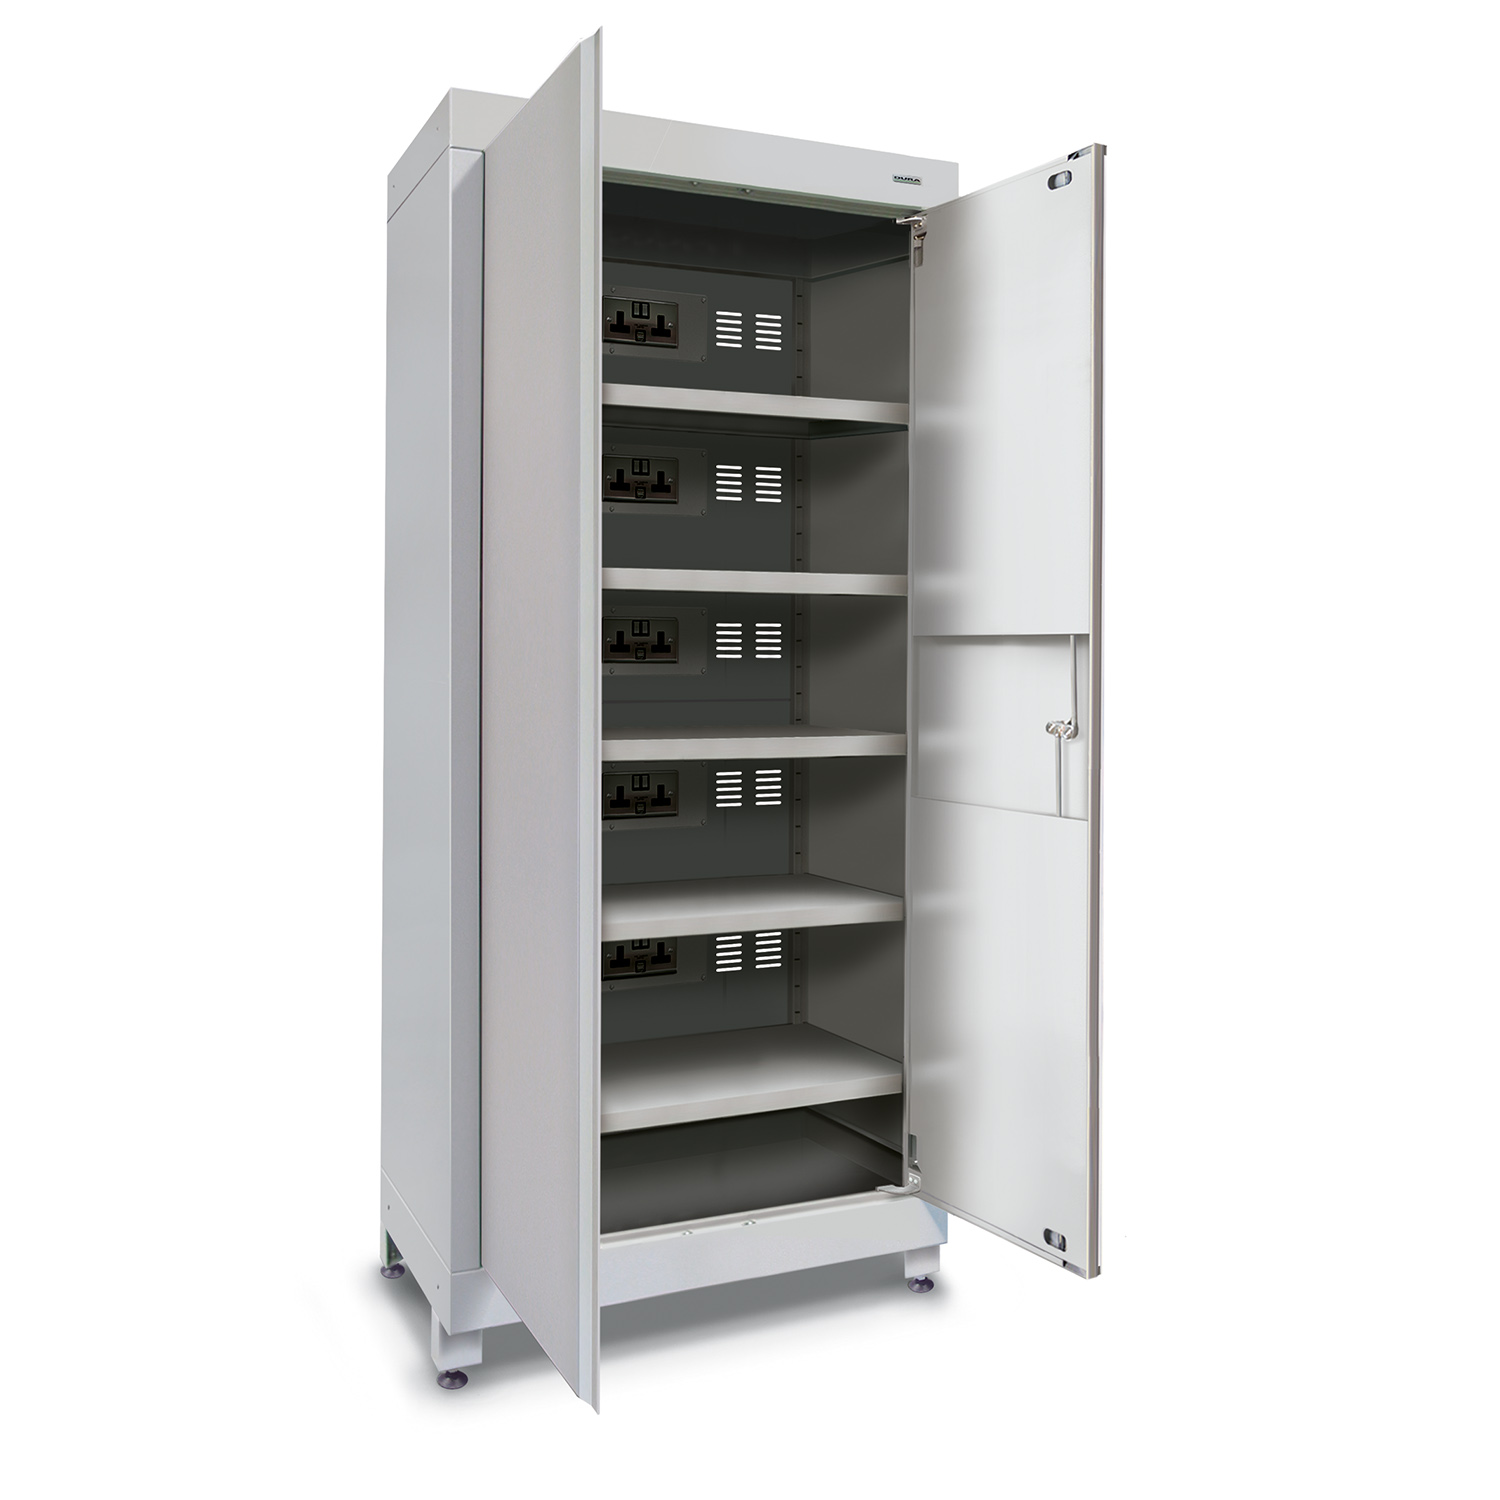 2m high heavy-duty shelving for electrical charging